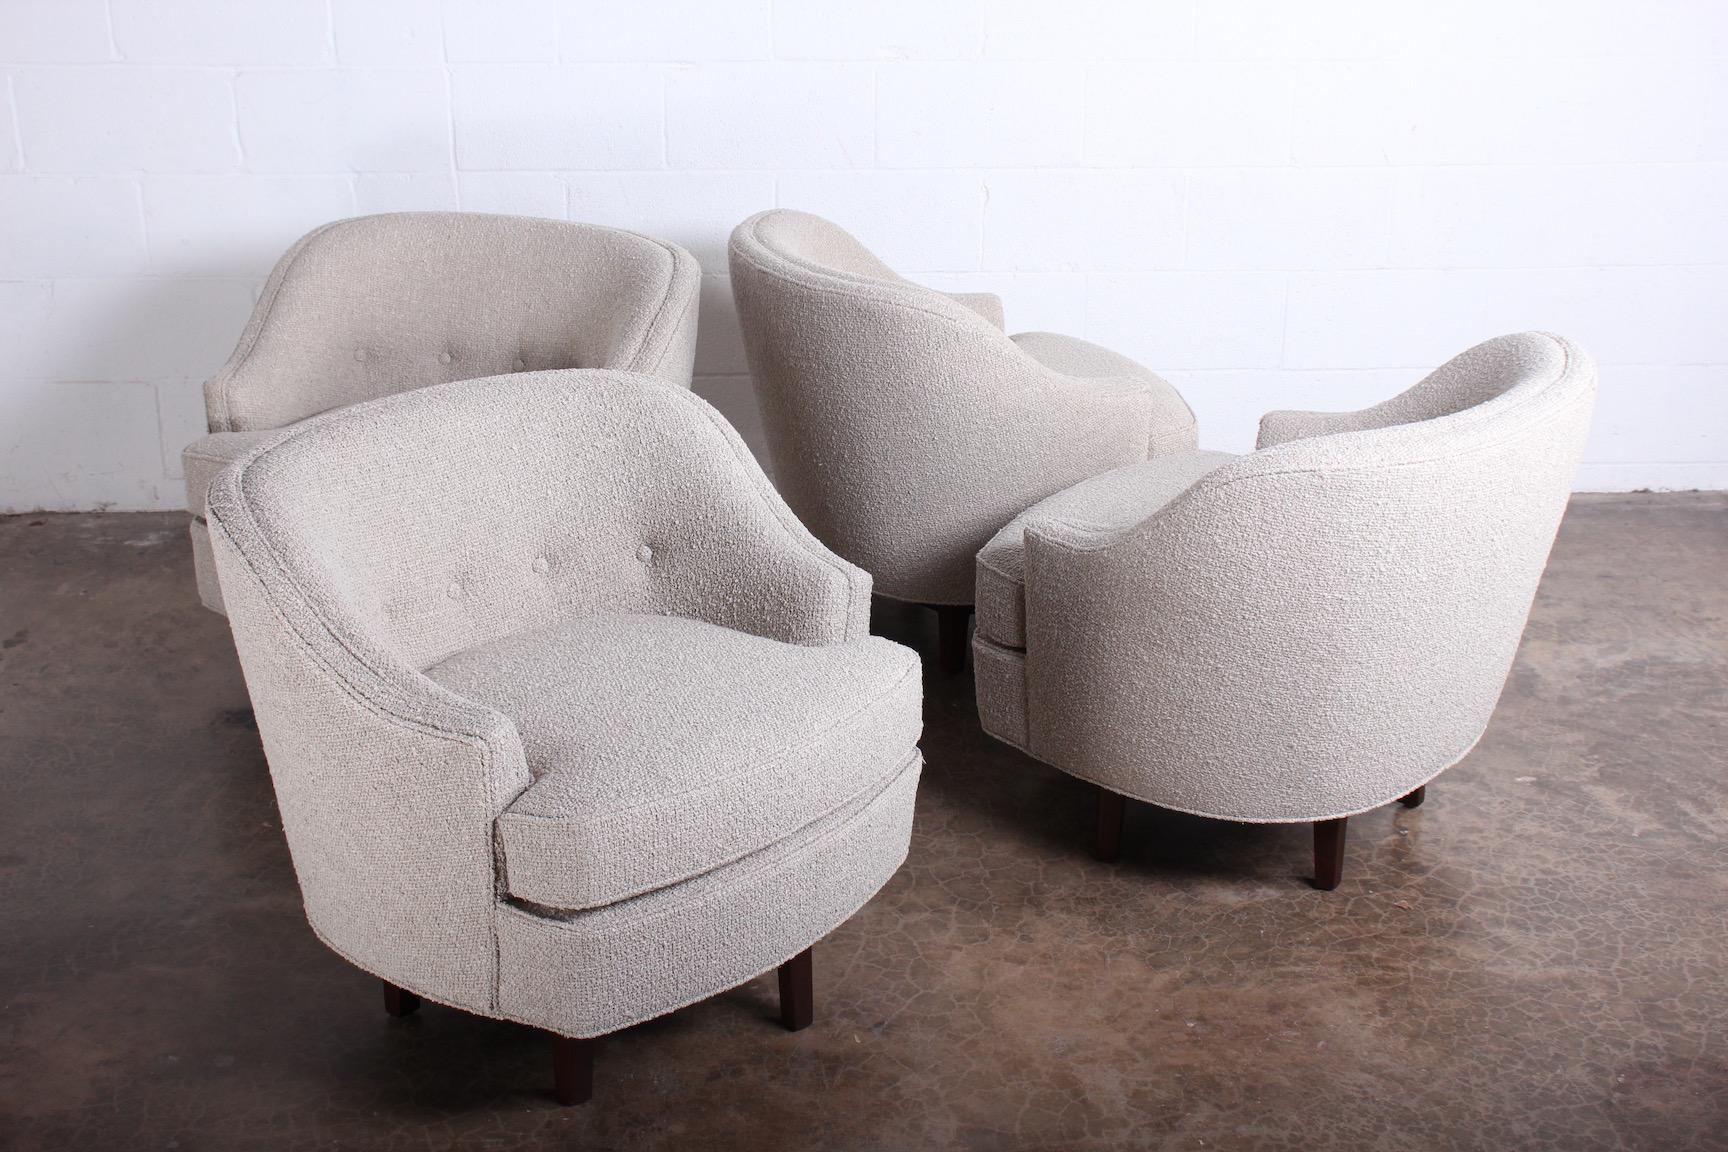 A pair of swivel chairs on walnut bases. Designed by Edward Wormley for Dunbar. Fully restored and upholstered in Rubelli boucle fabric. Two pair available.